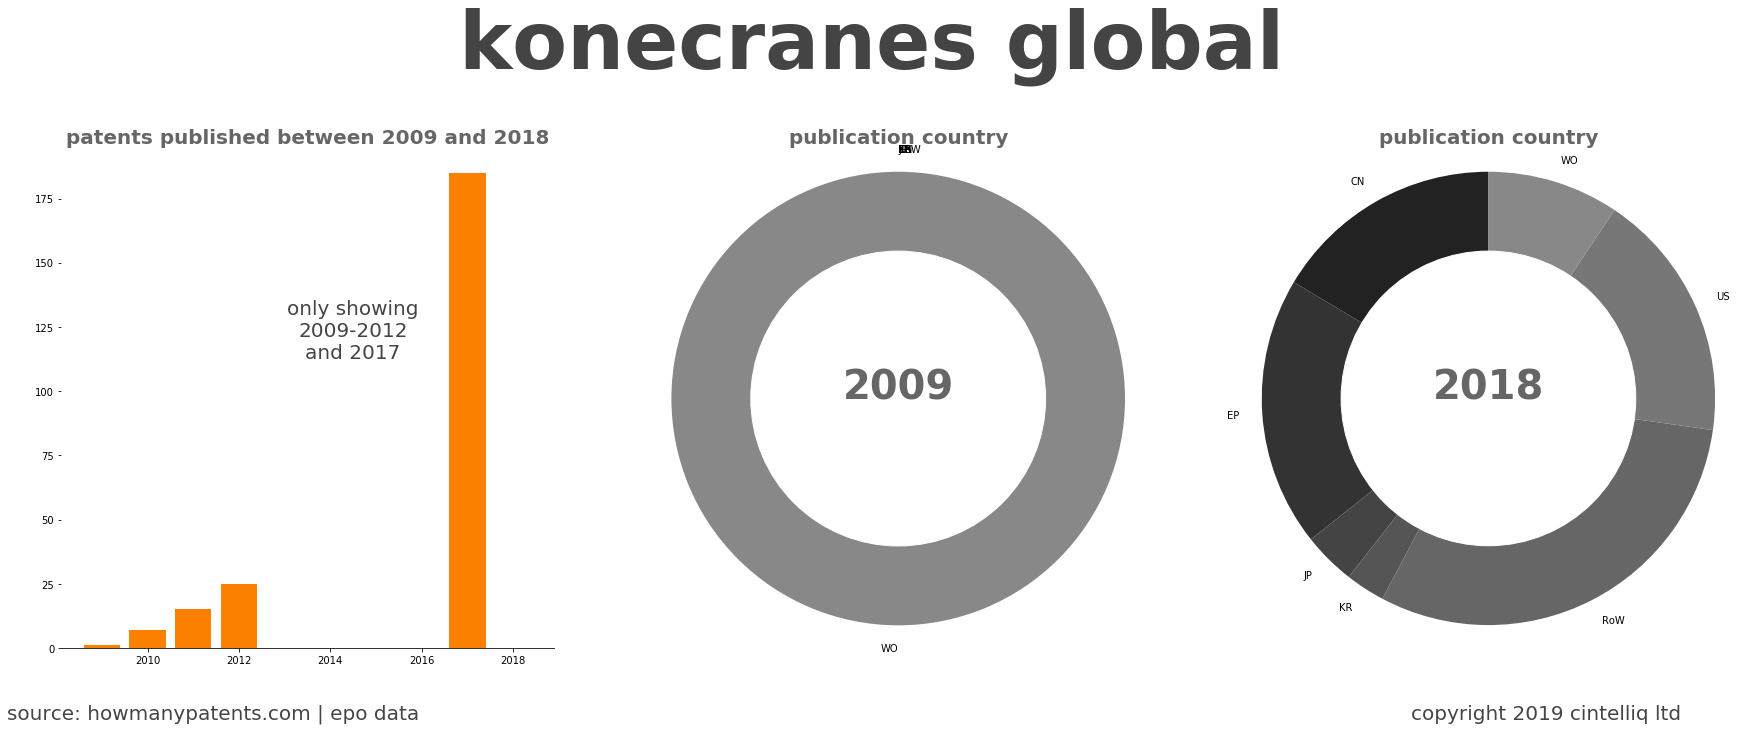 summary of patents for Konecranes Global